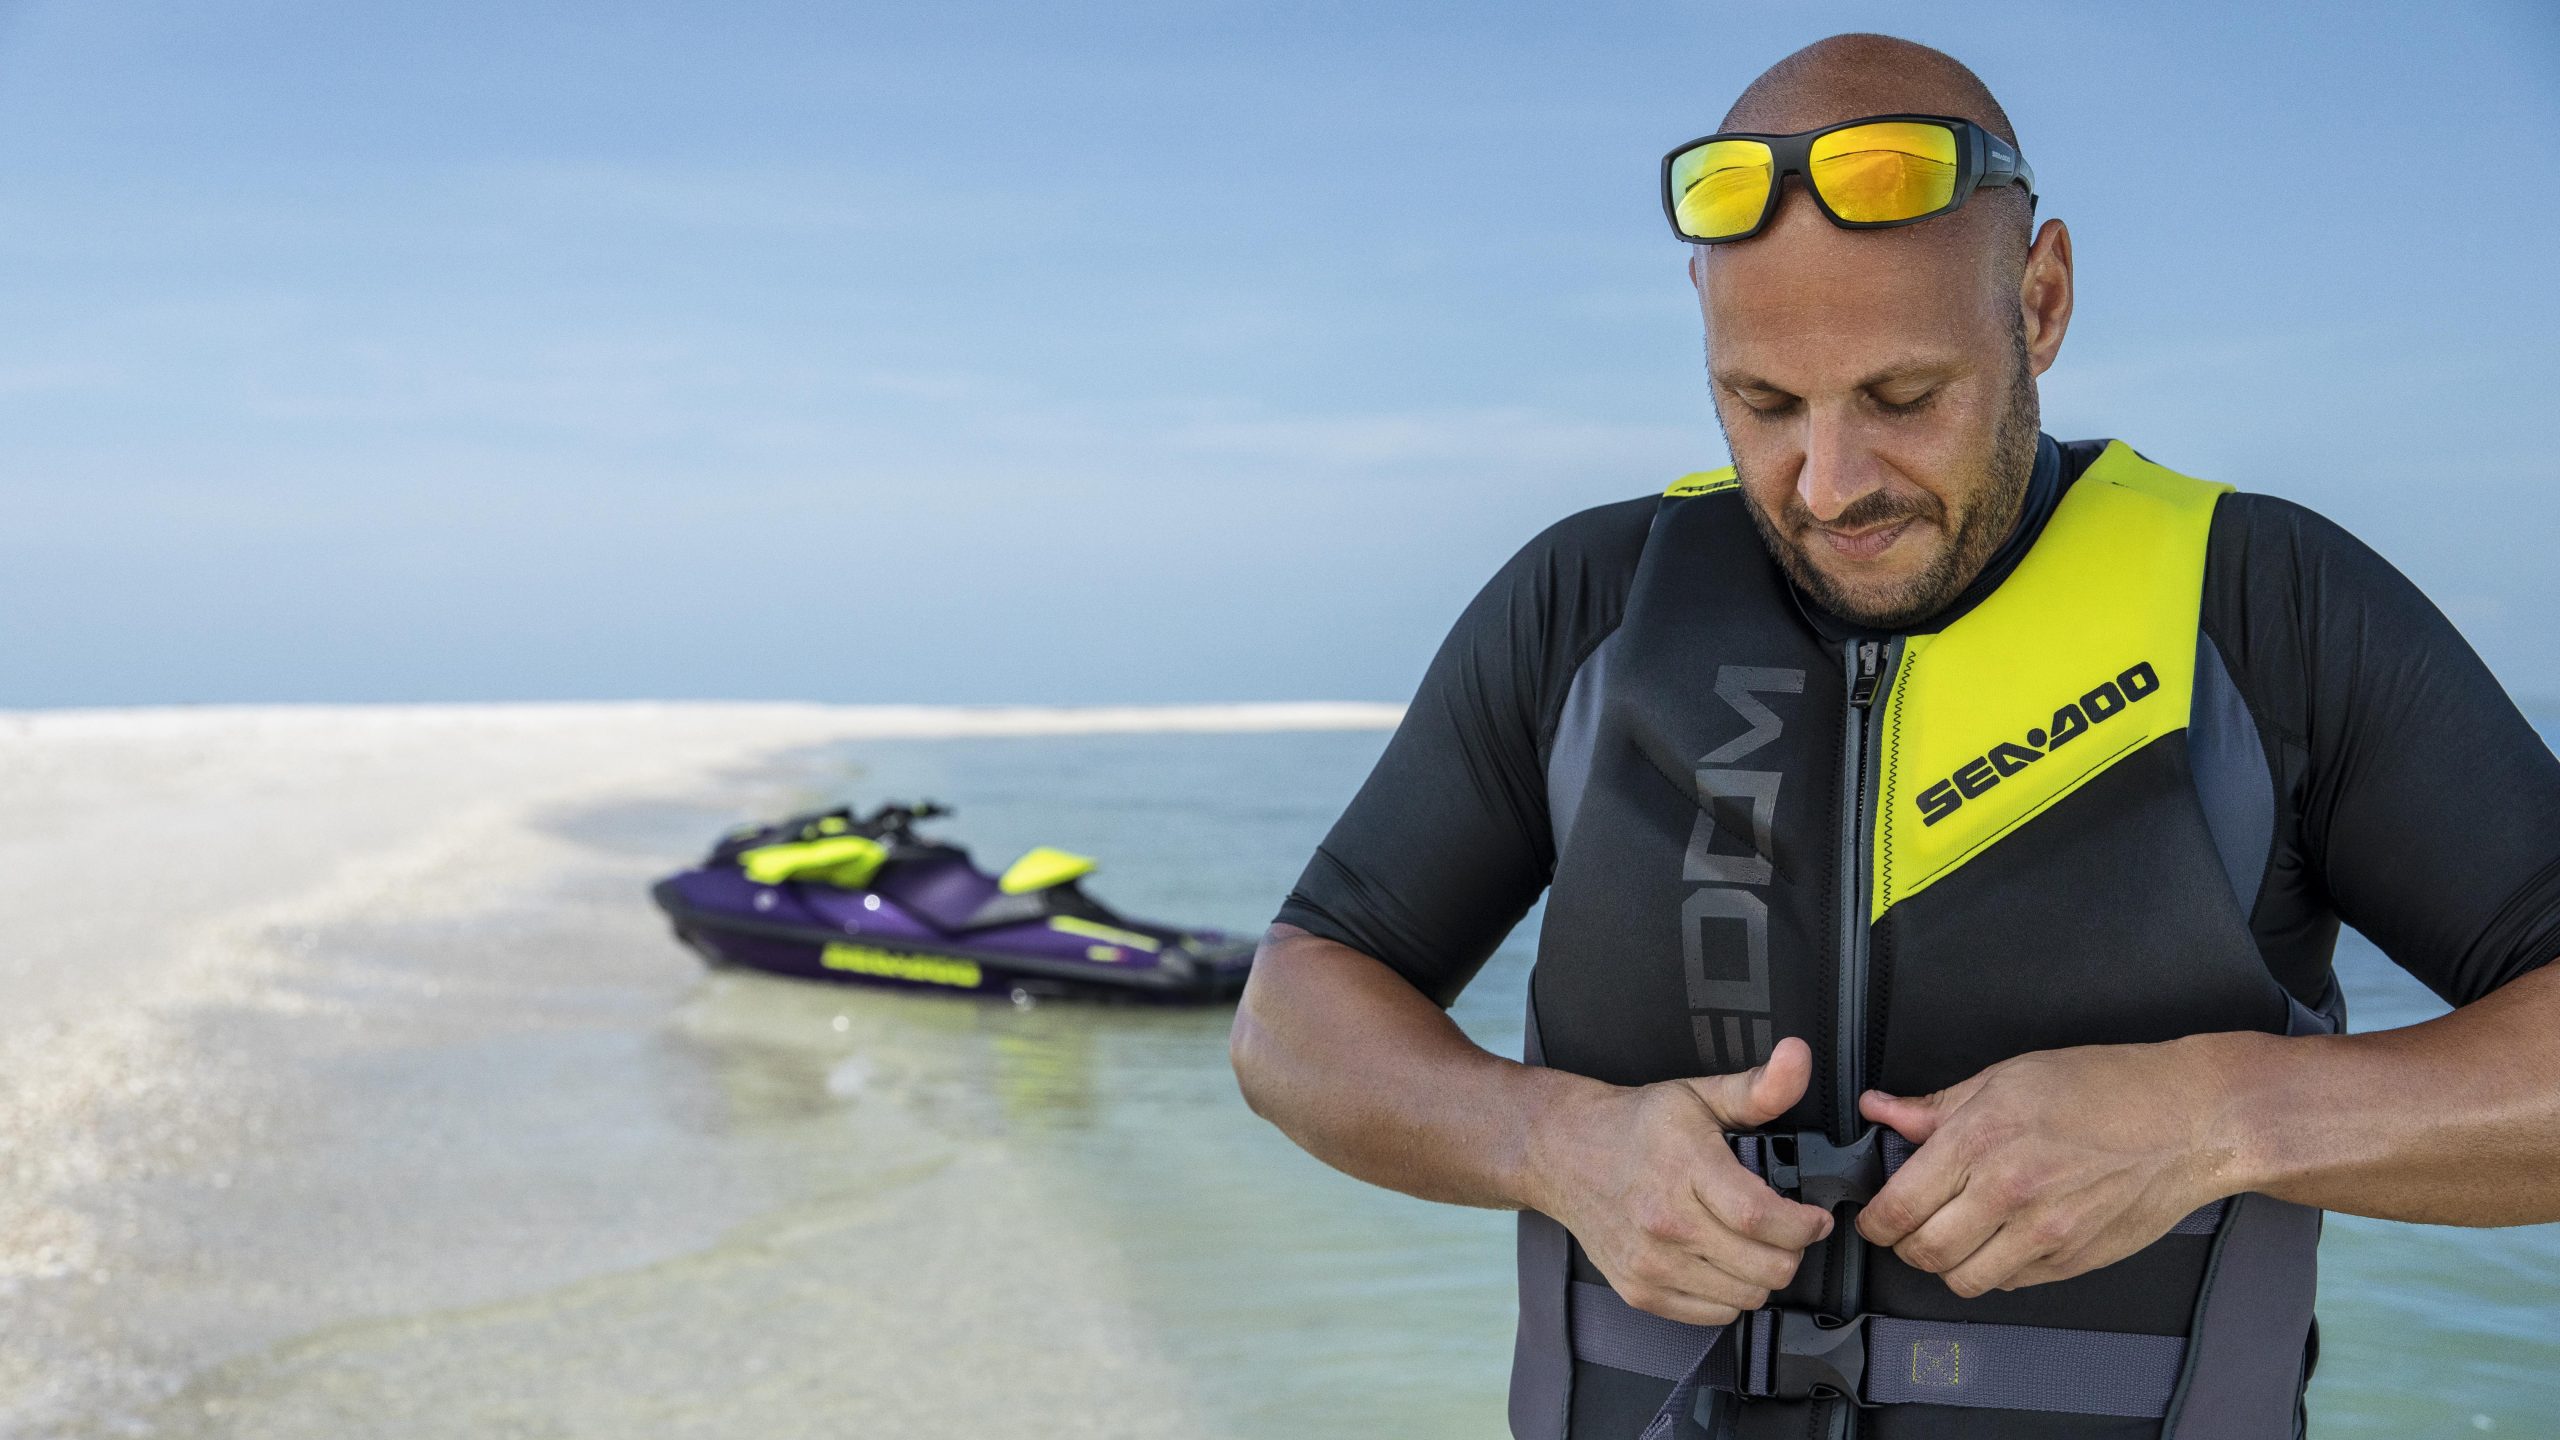 Top Gear: Essential equipment for Jet Skis and personal watercraft 